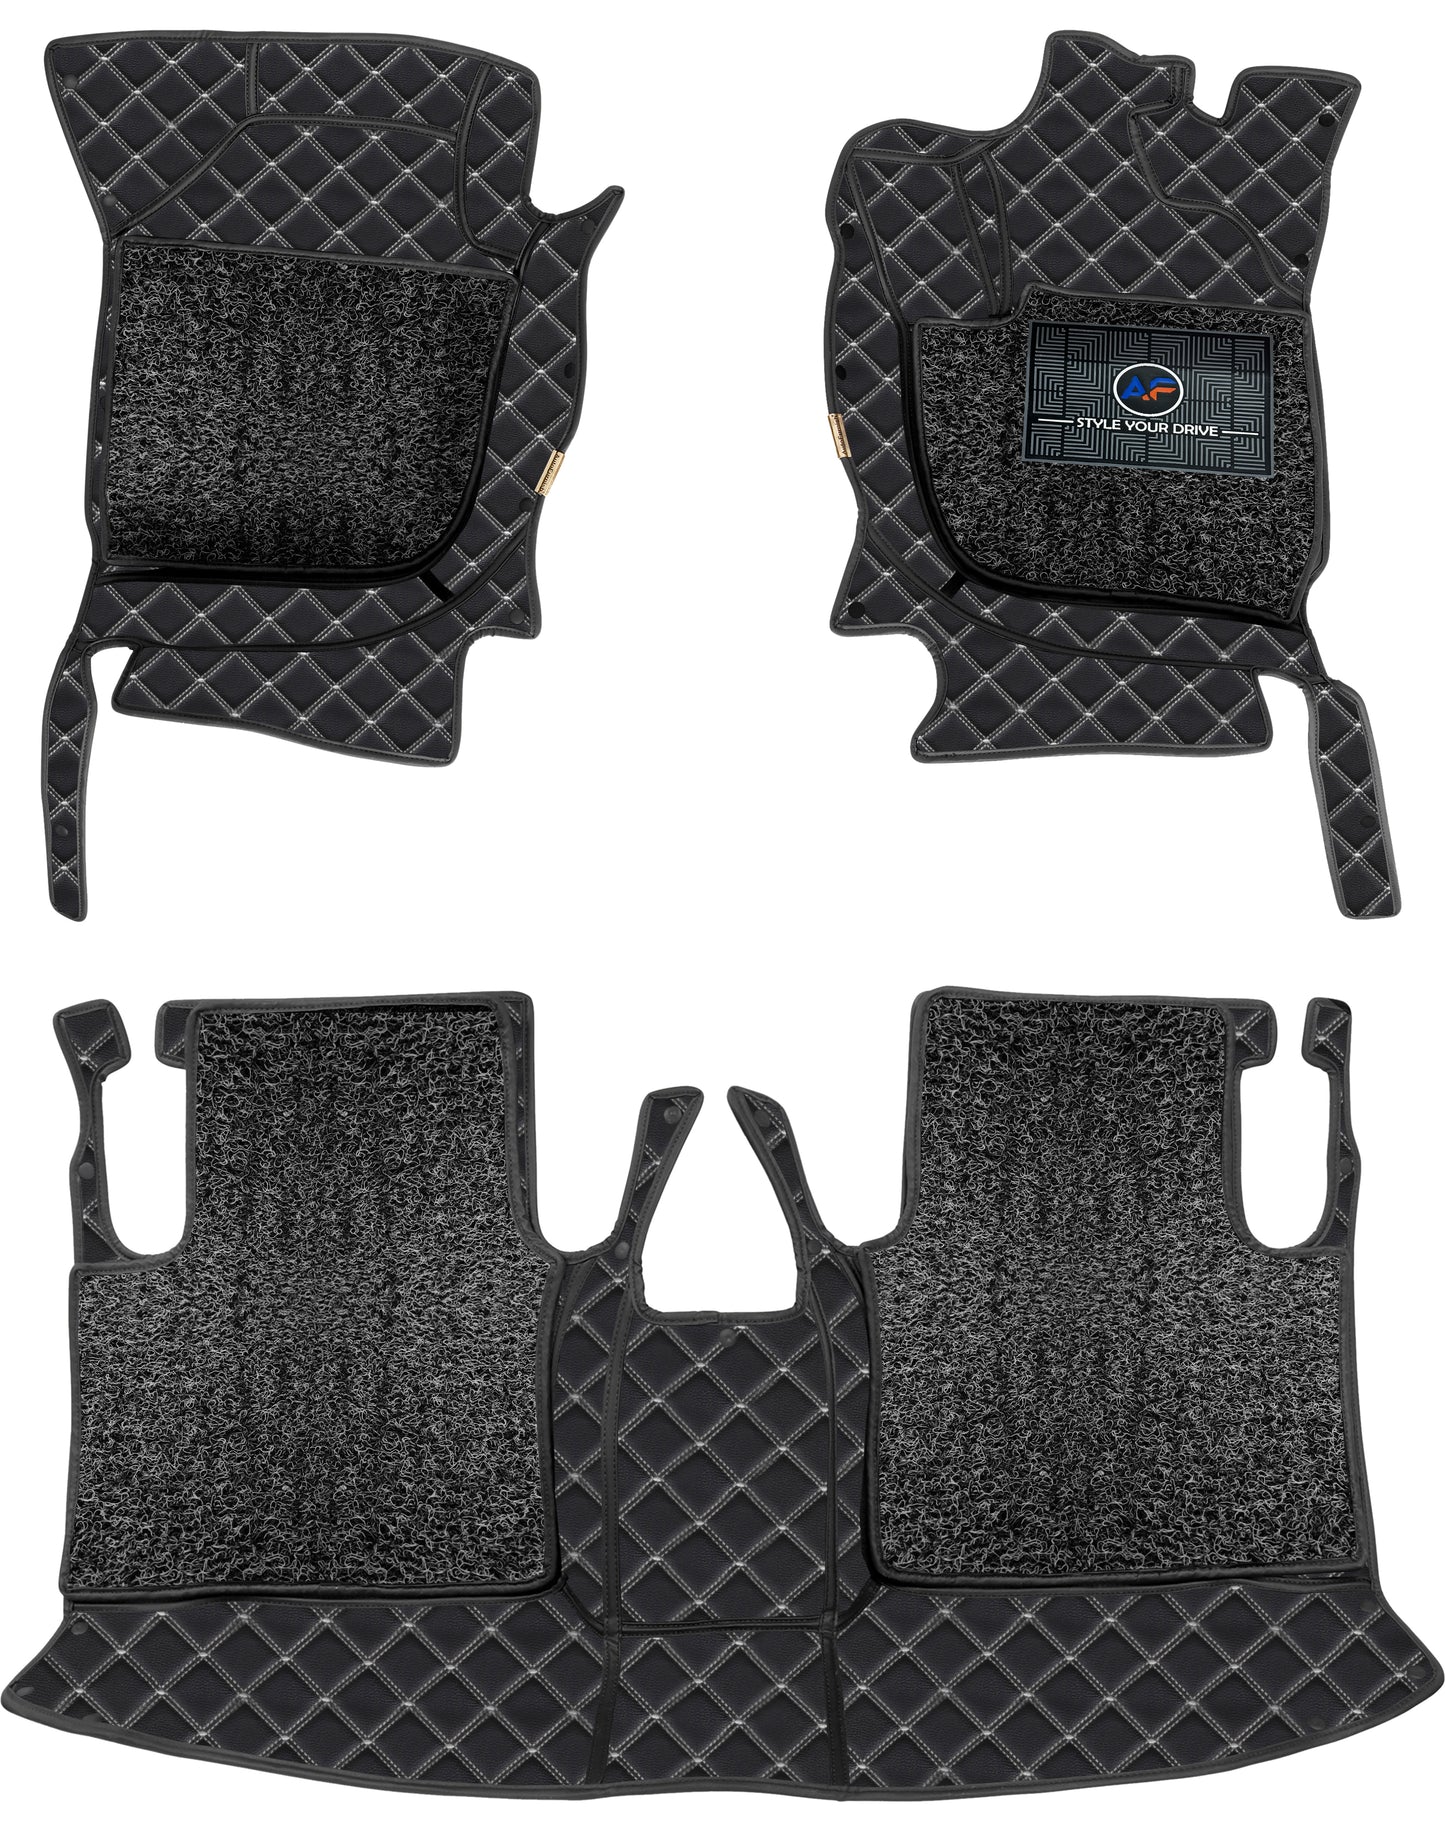 Volvo S60 (2015-21)-7D Luxury Car Mat, All Weather Proof, Anti-Skid, 100% Waterproof & Odorless with Unique Diamond Fish Design (24mm Luxury PU Leather, 2 Rows)